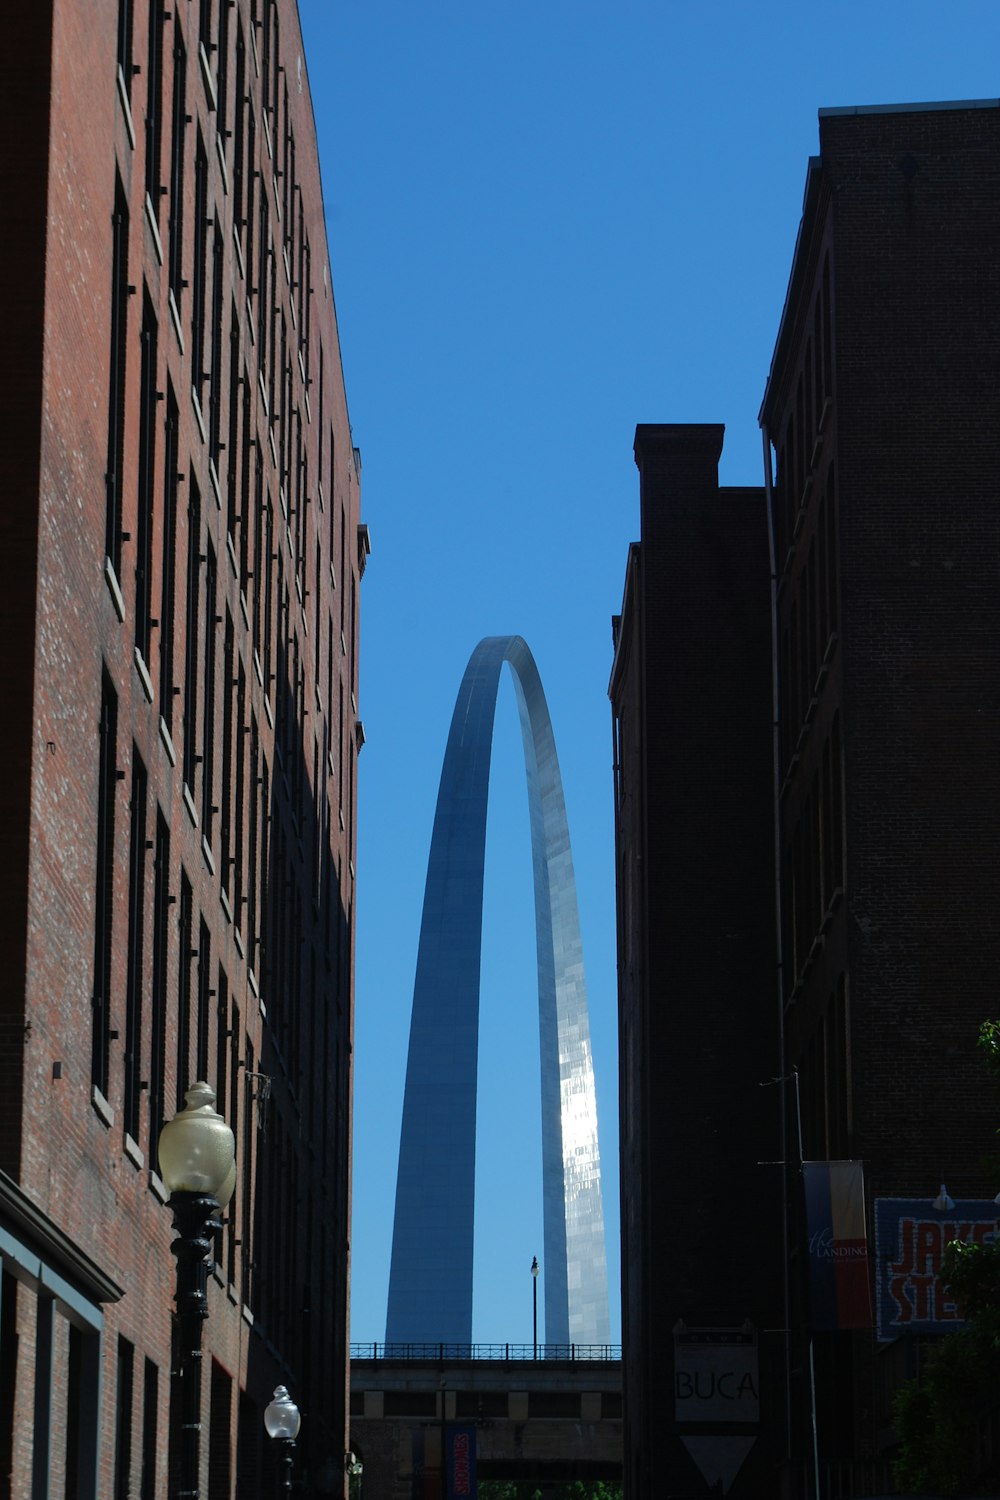 the arch of the st louis arch towering over the city